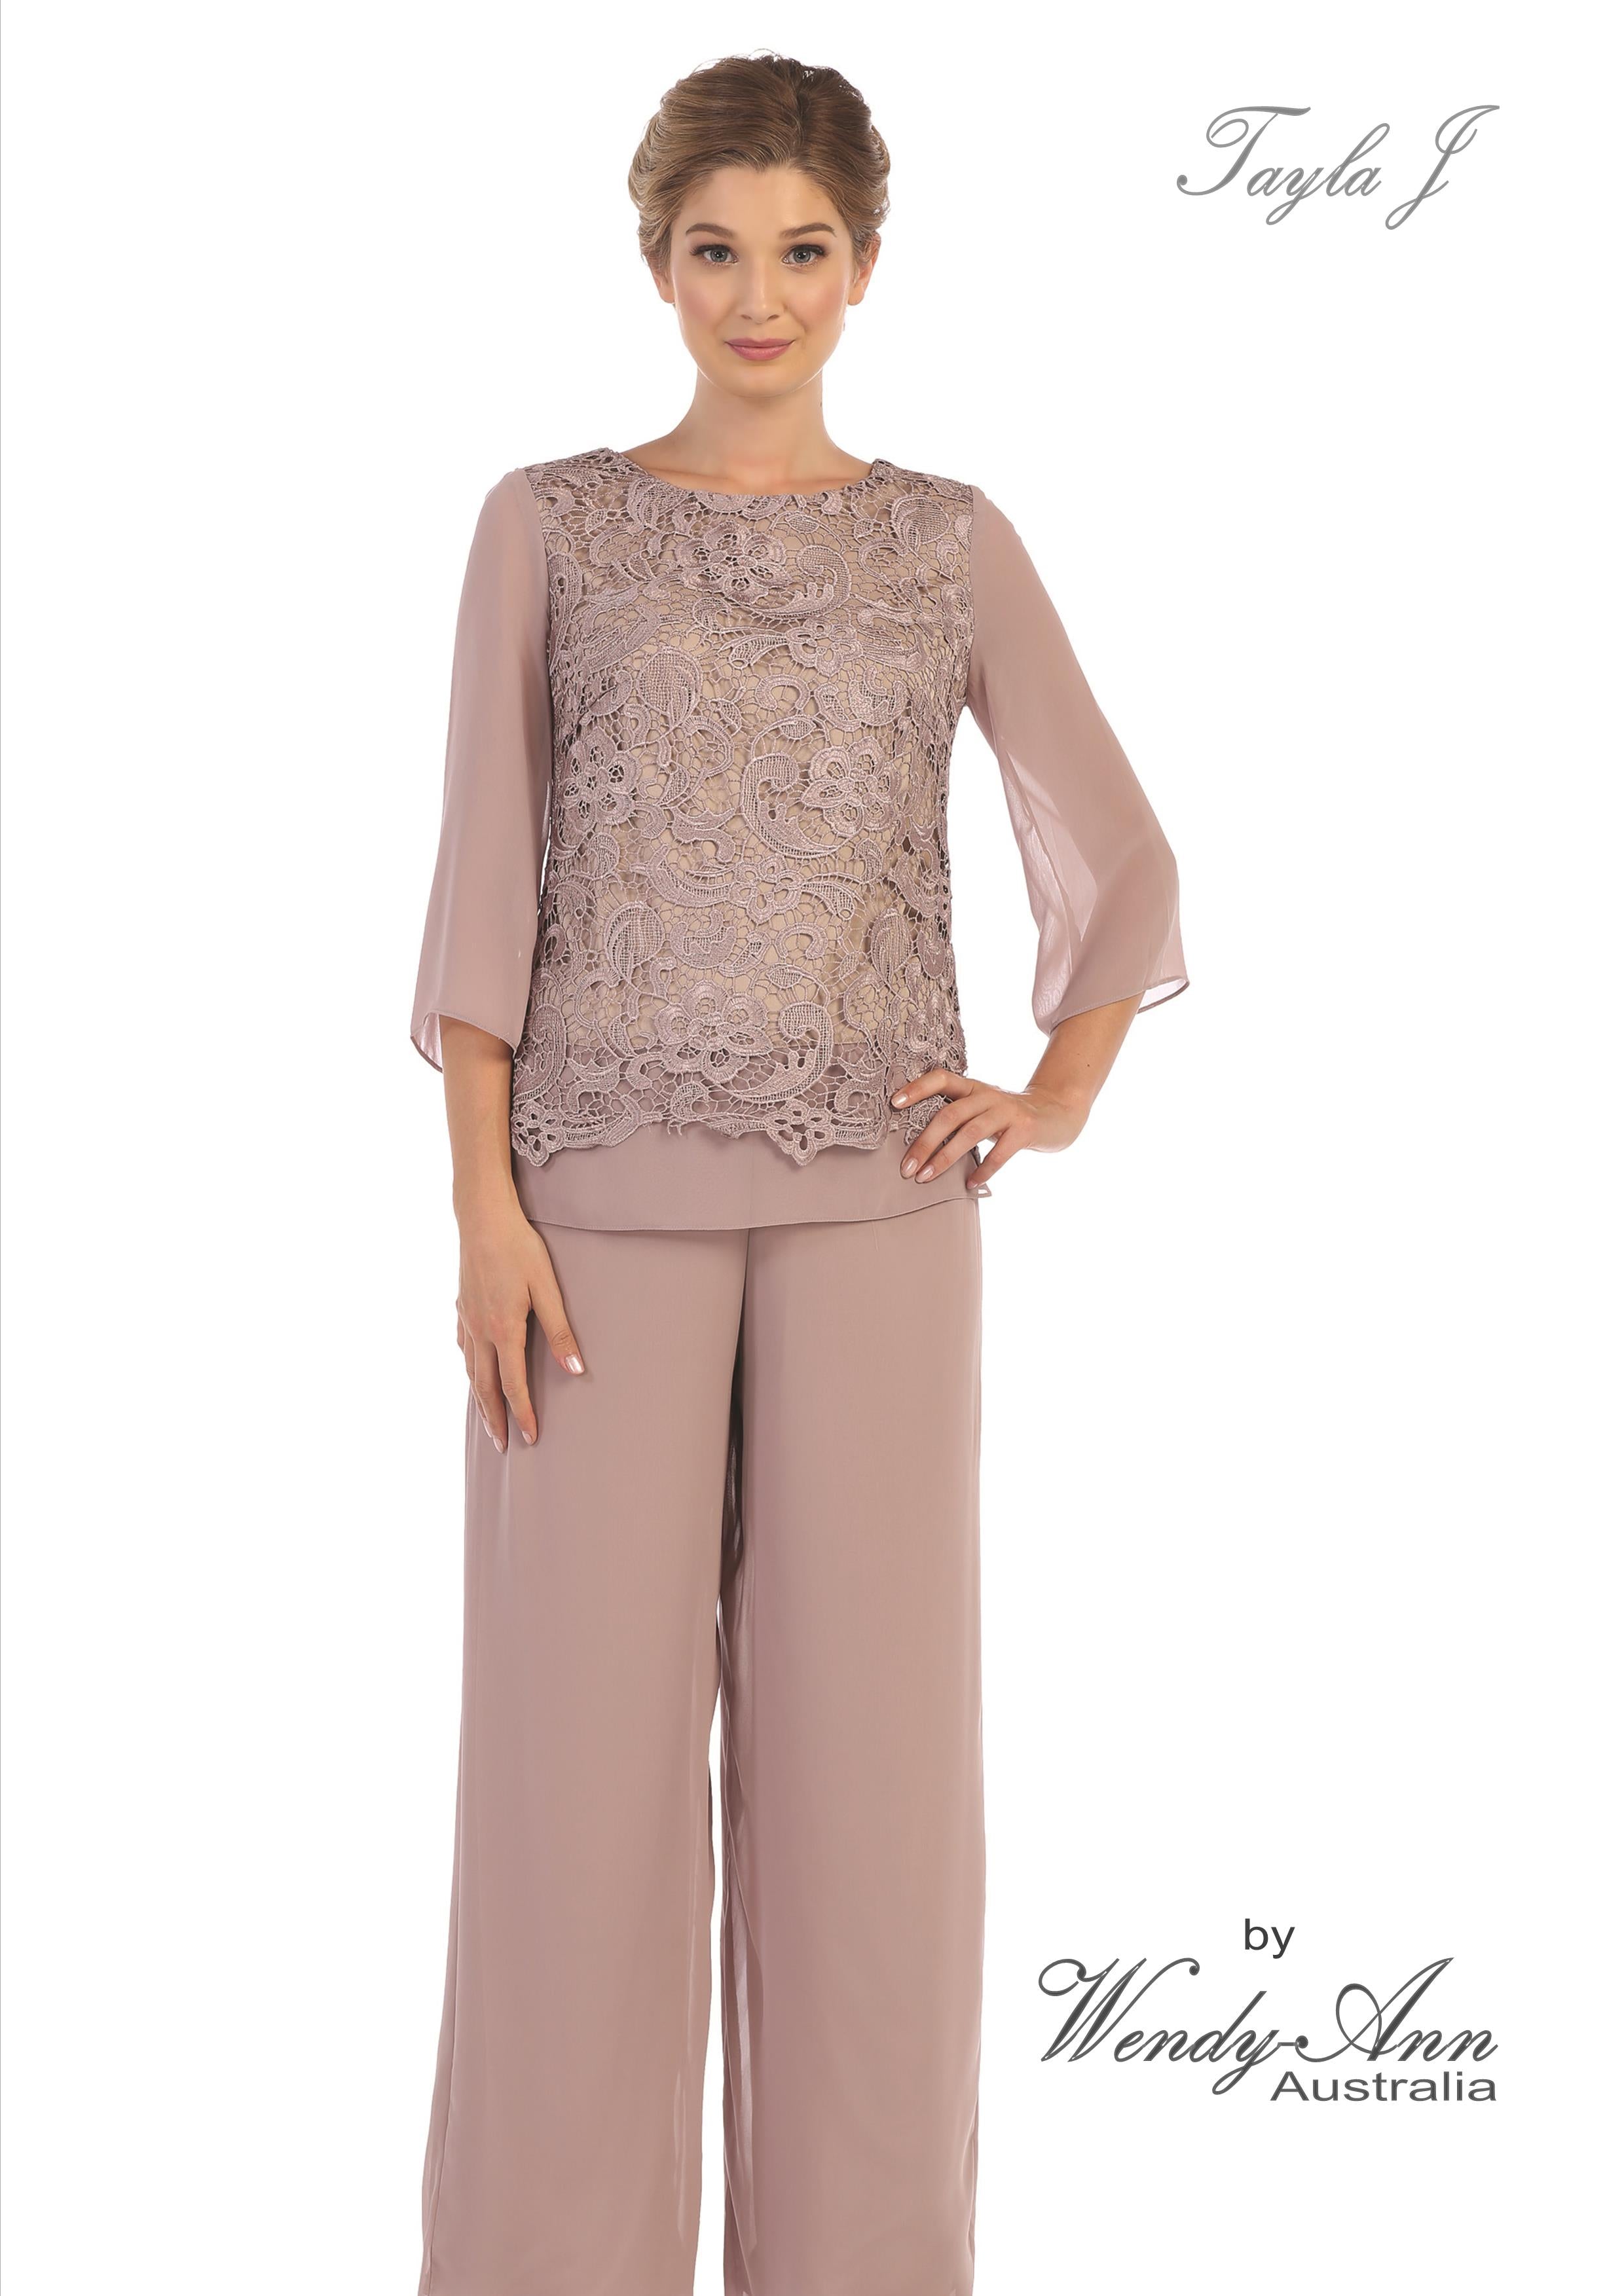 Elegant Mother of the Bride Pant Suits for a Glamorous Look